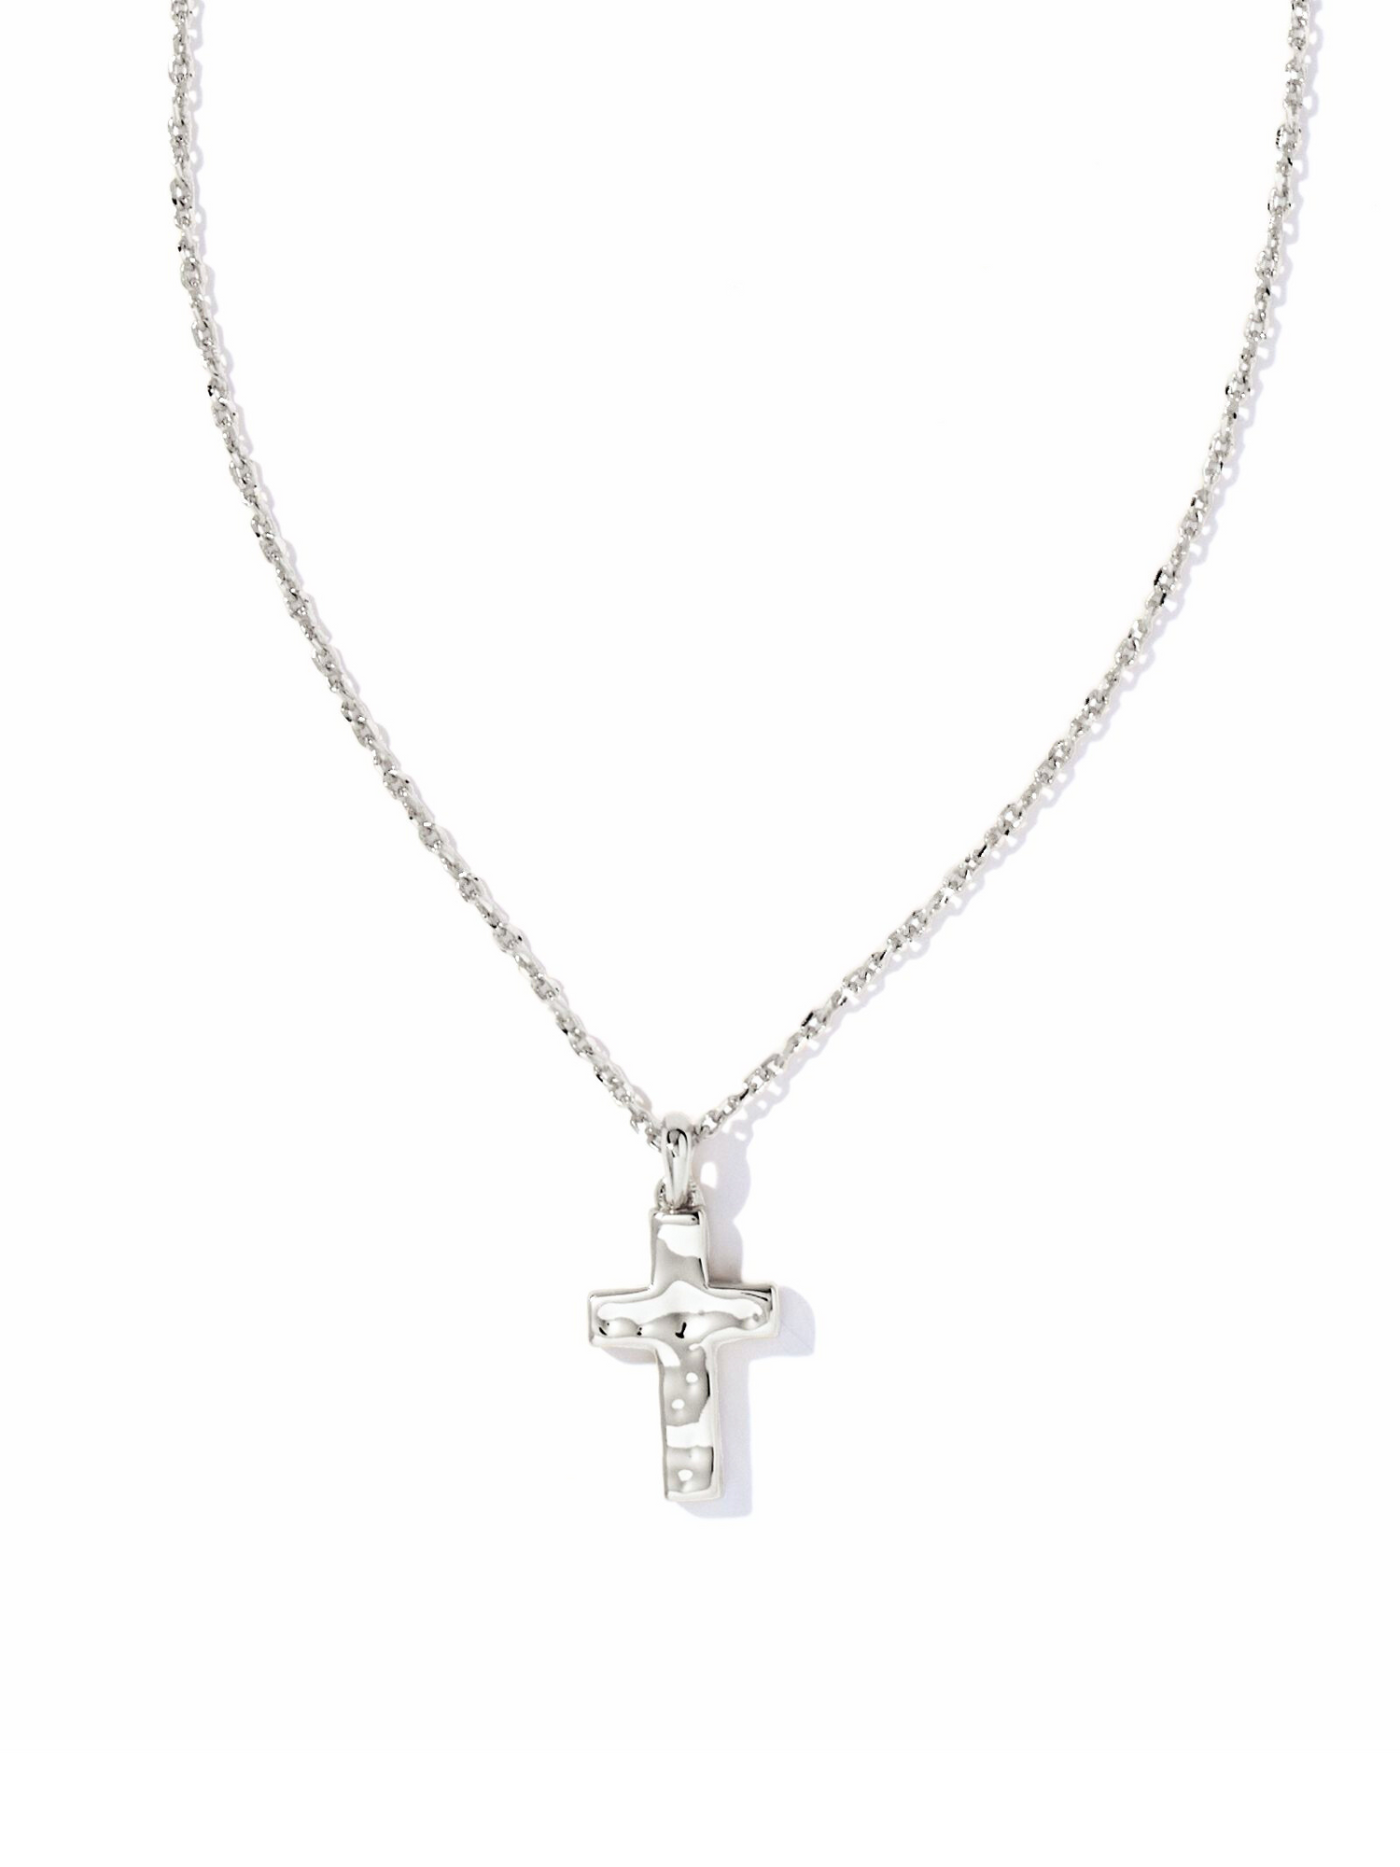 Cross Pendant Necklace Silver on white background, front view.